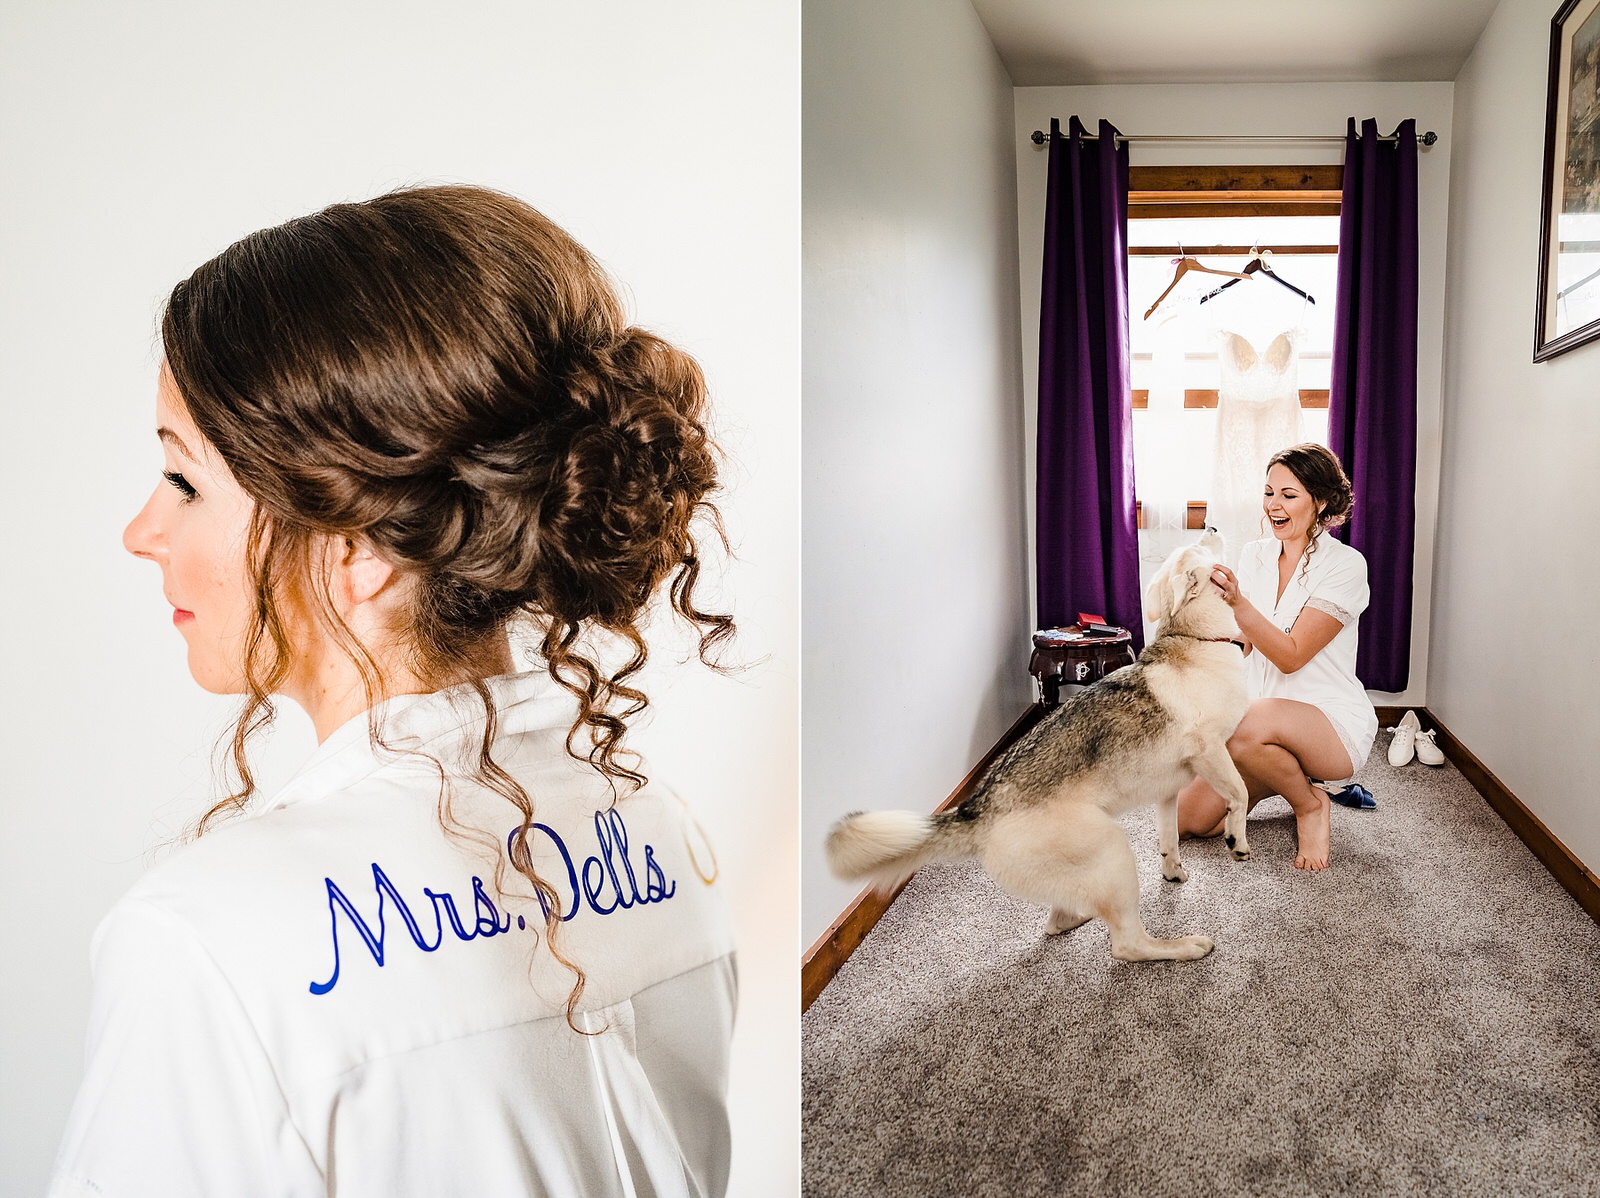 Bride's dog visits while she's getting ready